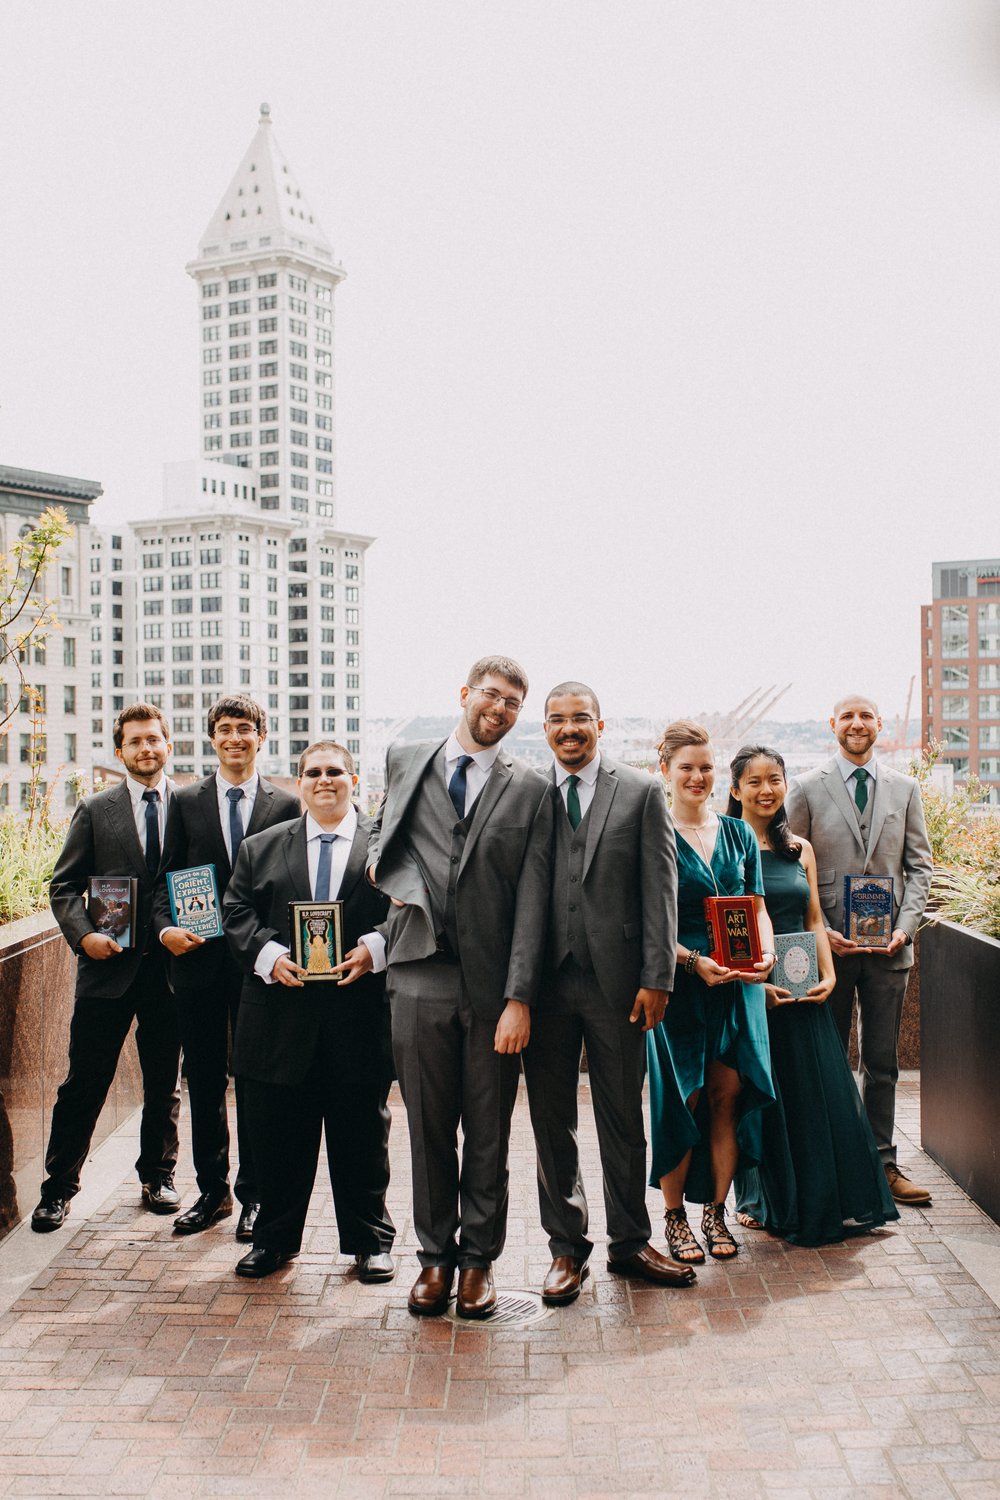  Two grooms and their wedding party pose on a brick sidewalk with Smith Tower in the background. 